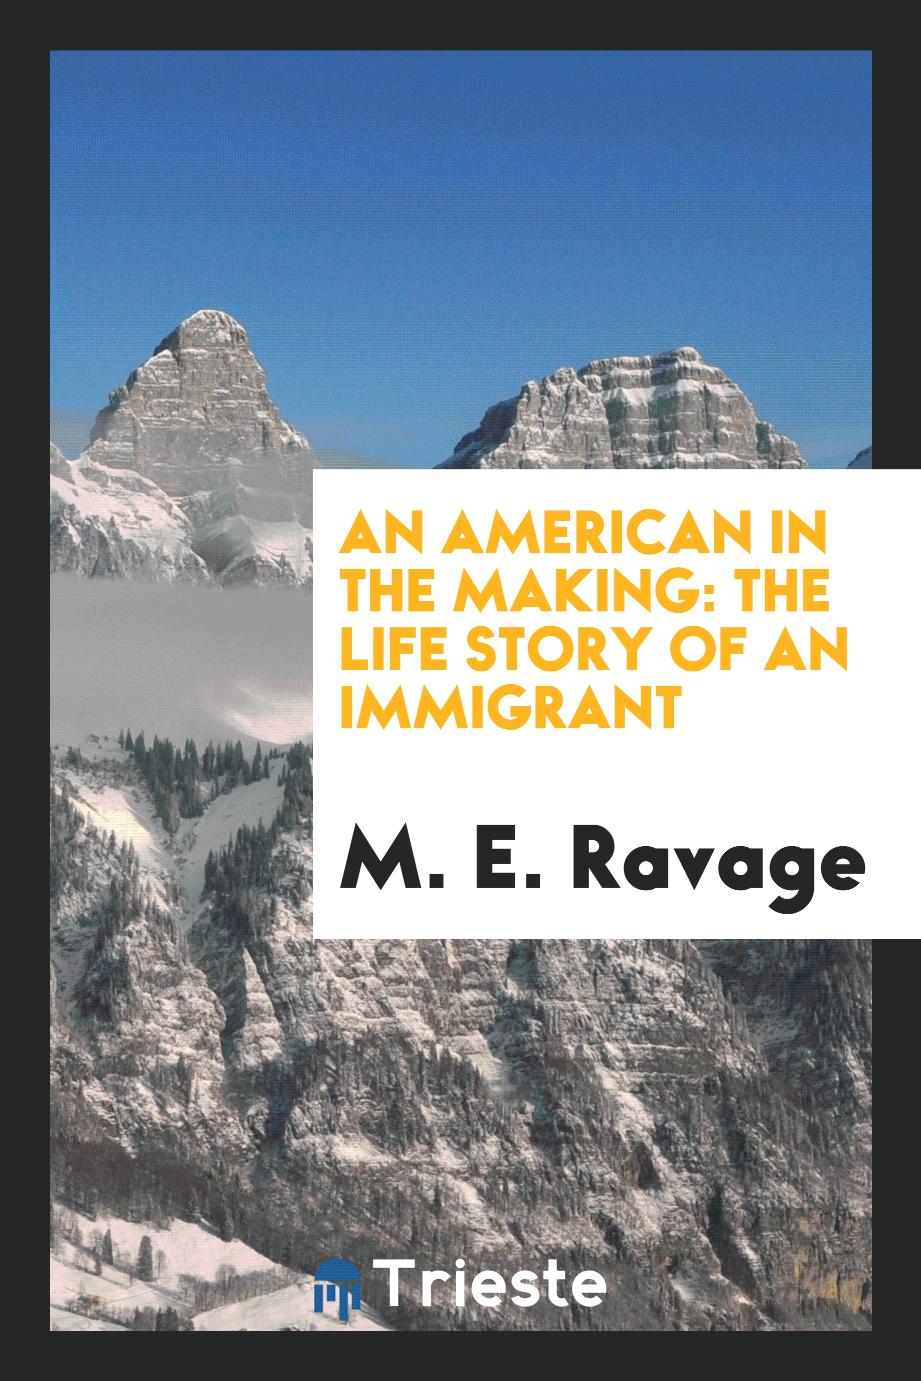 An American in the making: the life story of an immigrant